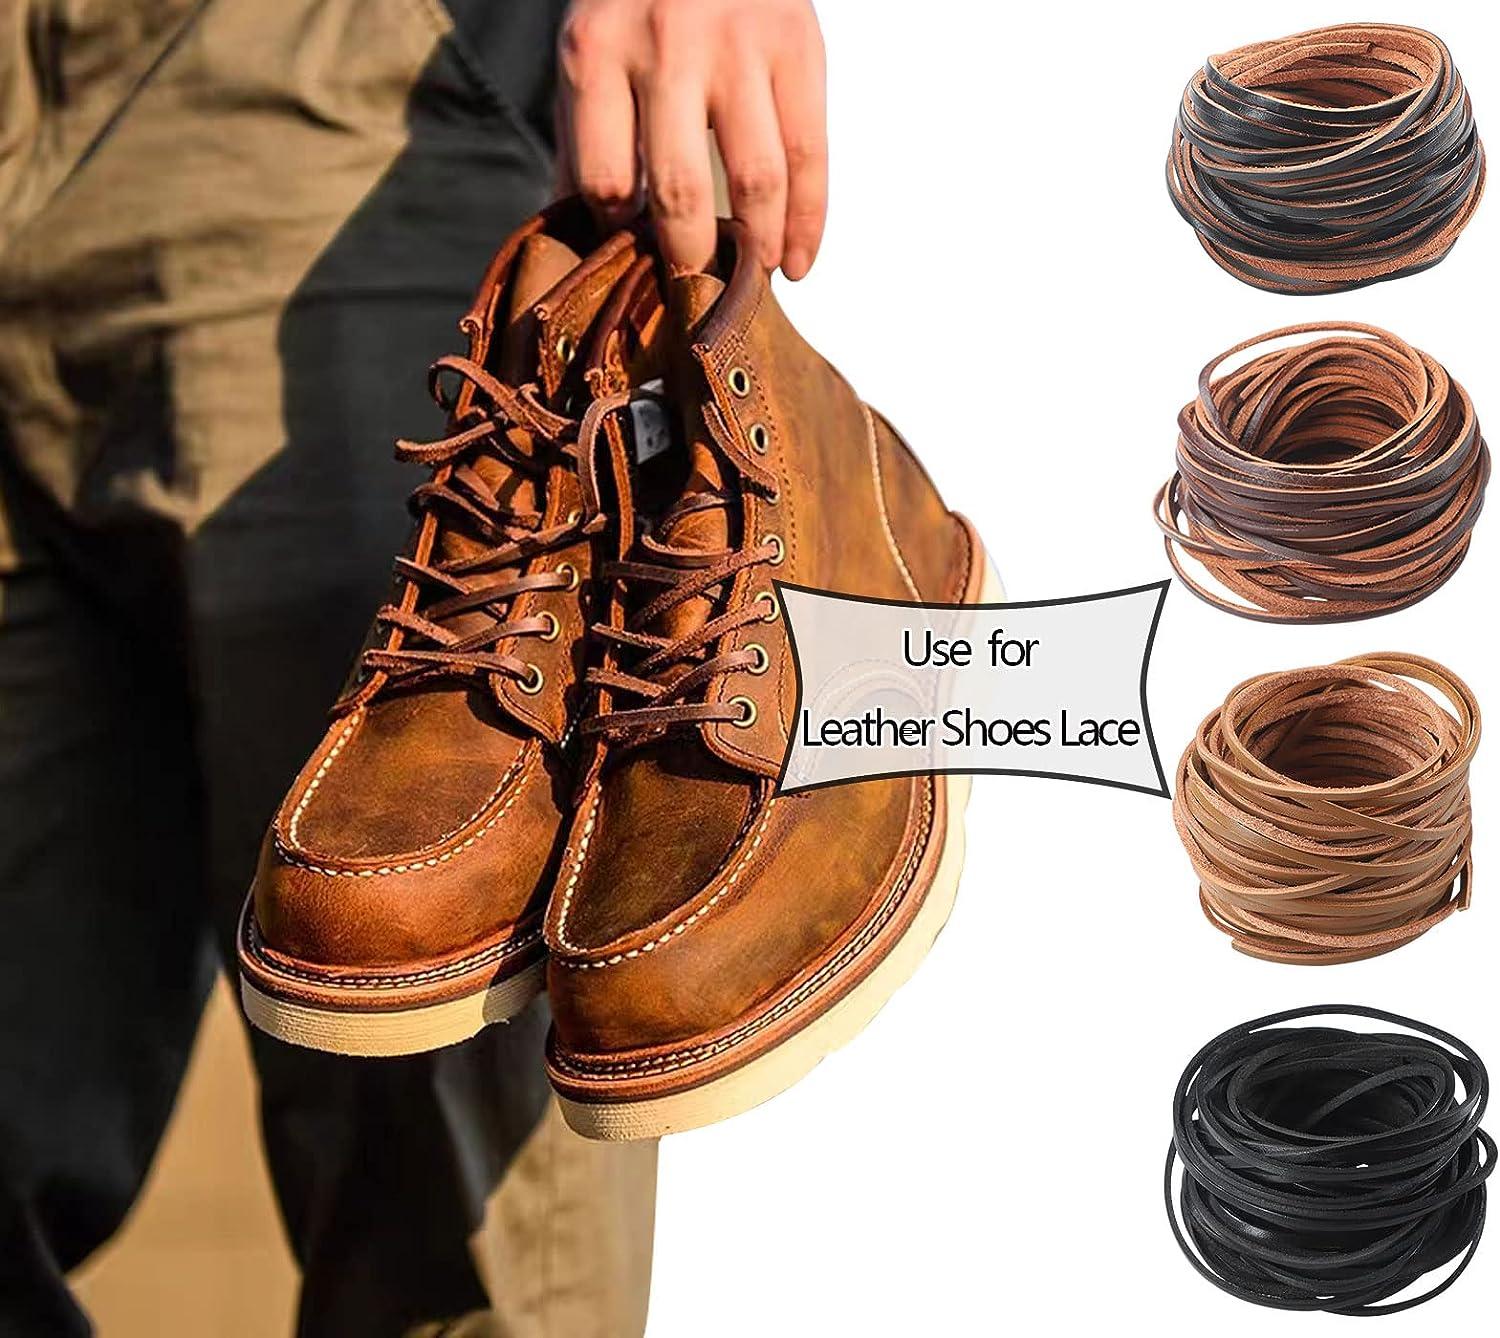 Picheng 3mm Flat Genuine Leather Cord, 5Yards Strip Cord Braiding String  Very Suitable for Jewelry Making, Leather Shoe Lace, Garden  Tools,Toys,Woven Bags,DIY Crafts Projects (Light Brown)